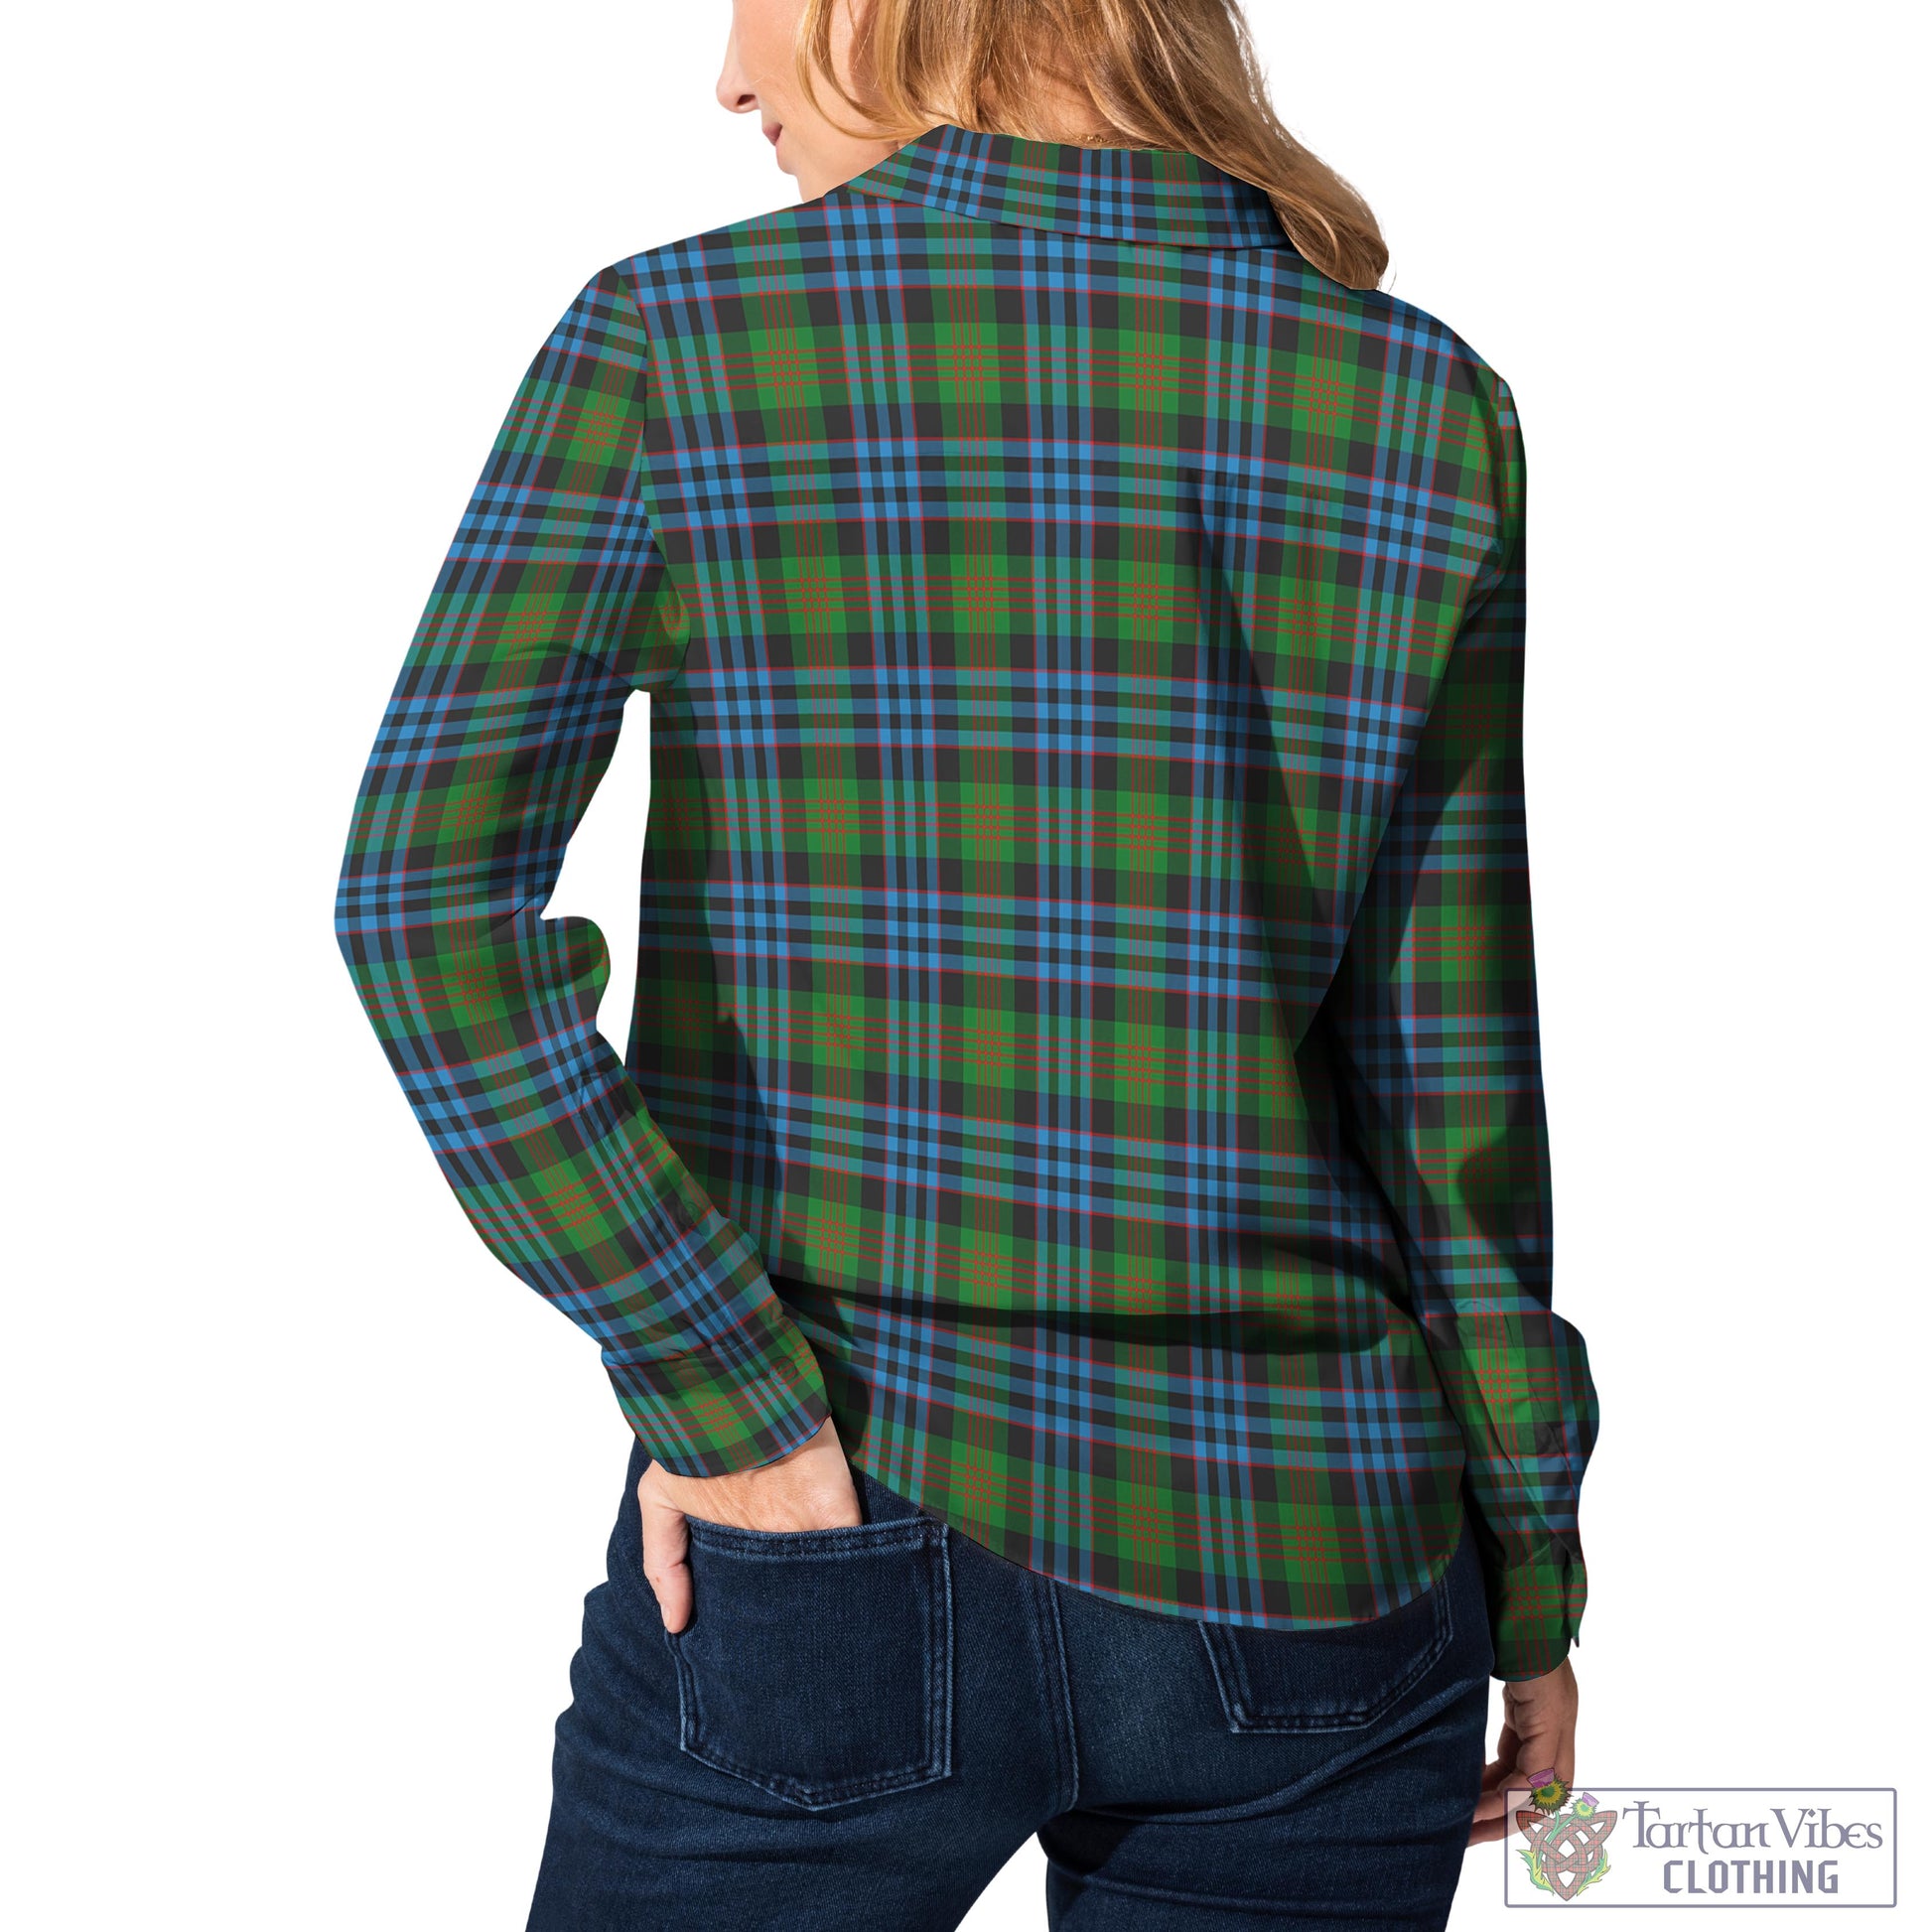 Tartan Vibes Clothing Newlands of Lauriston Tartan Womens Casual Shirt with Family Crest